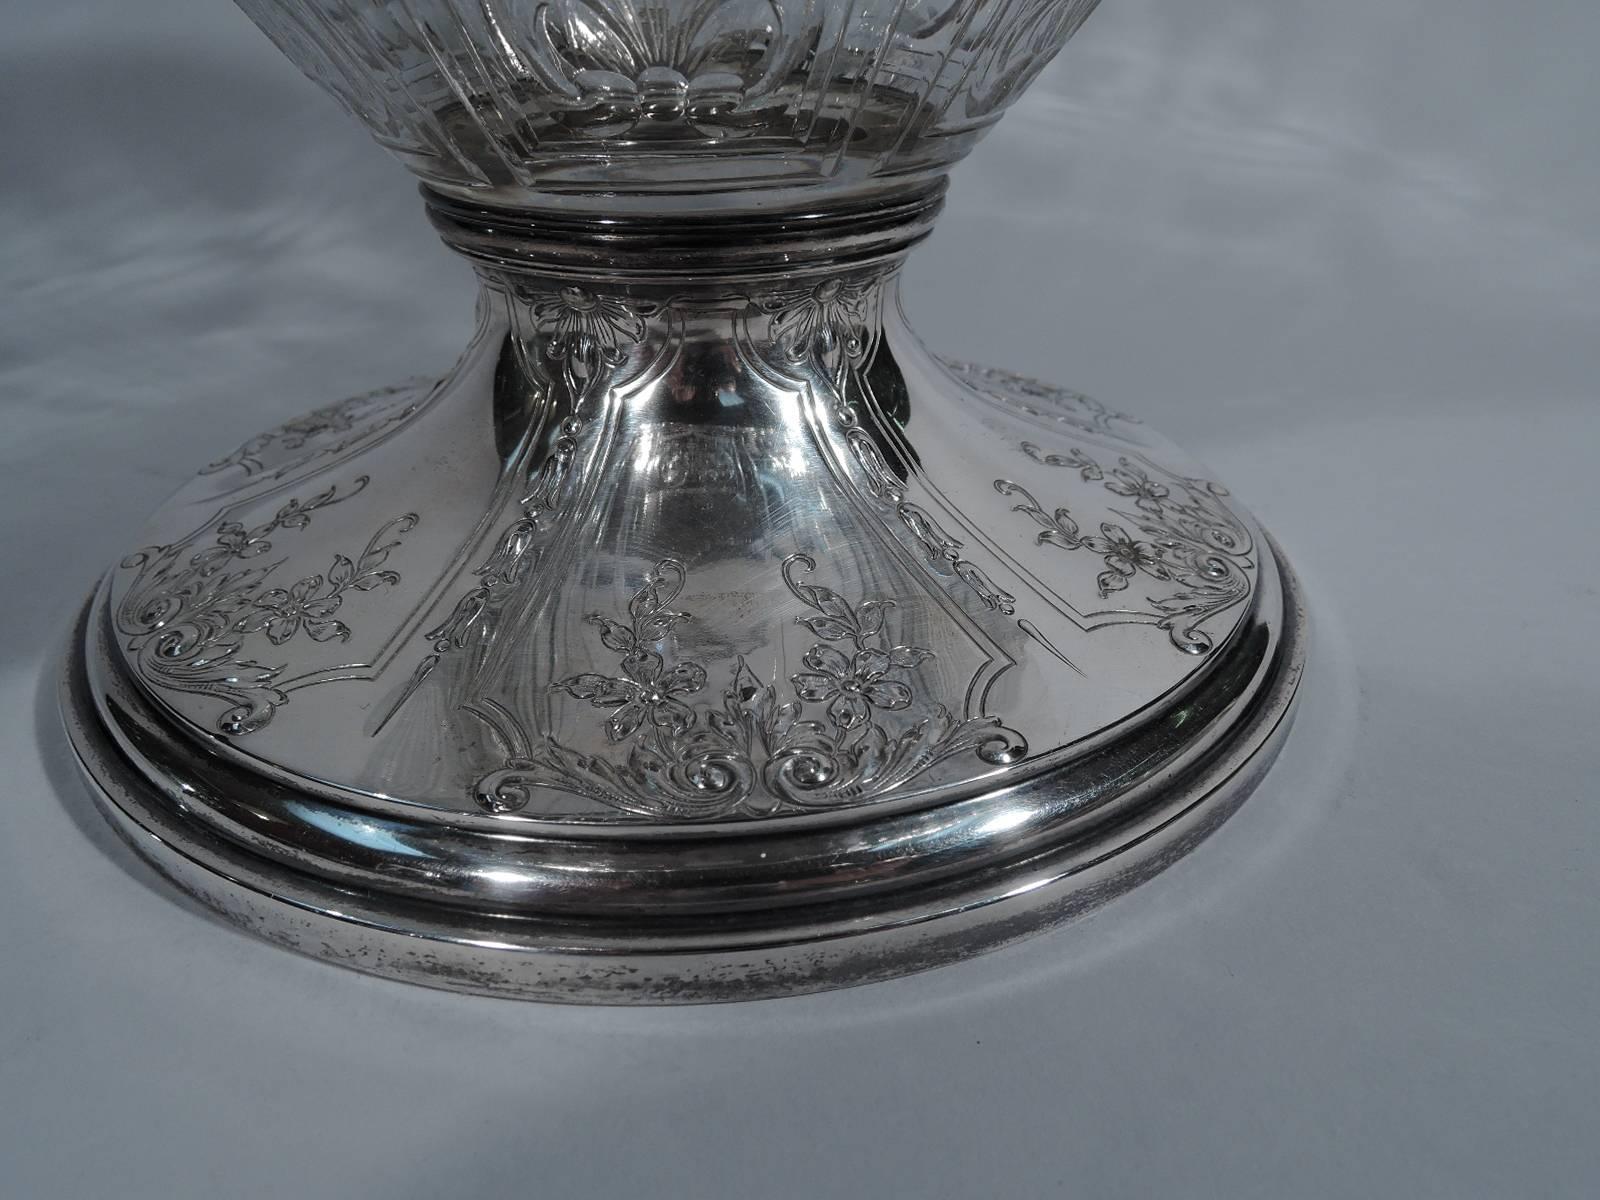 Gorham Edwardian Sterling Silver and Crystal Centerpiece Bowl 1